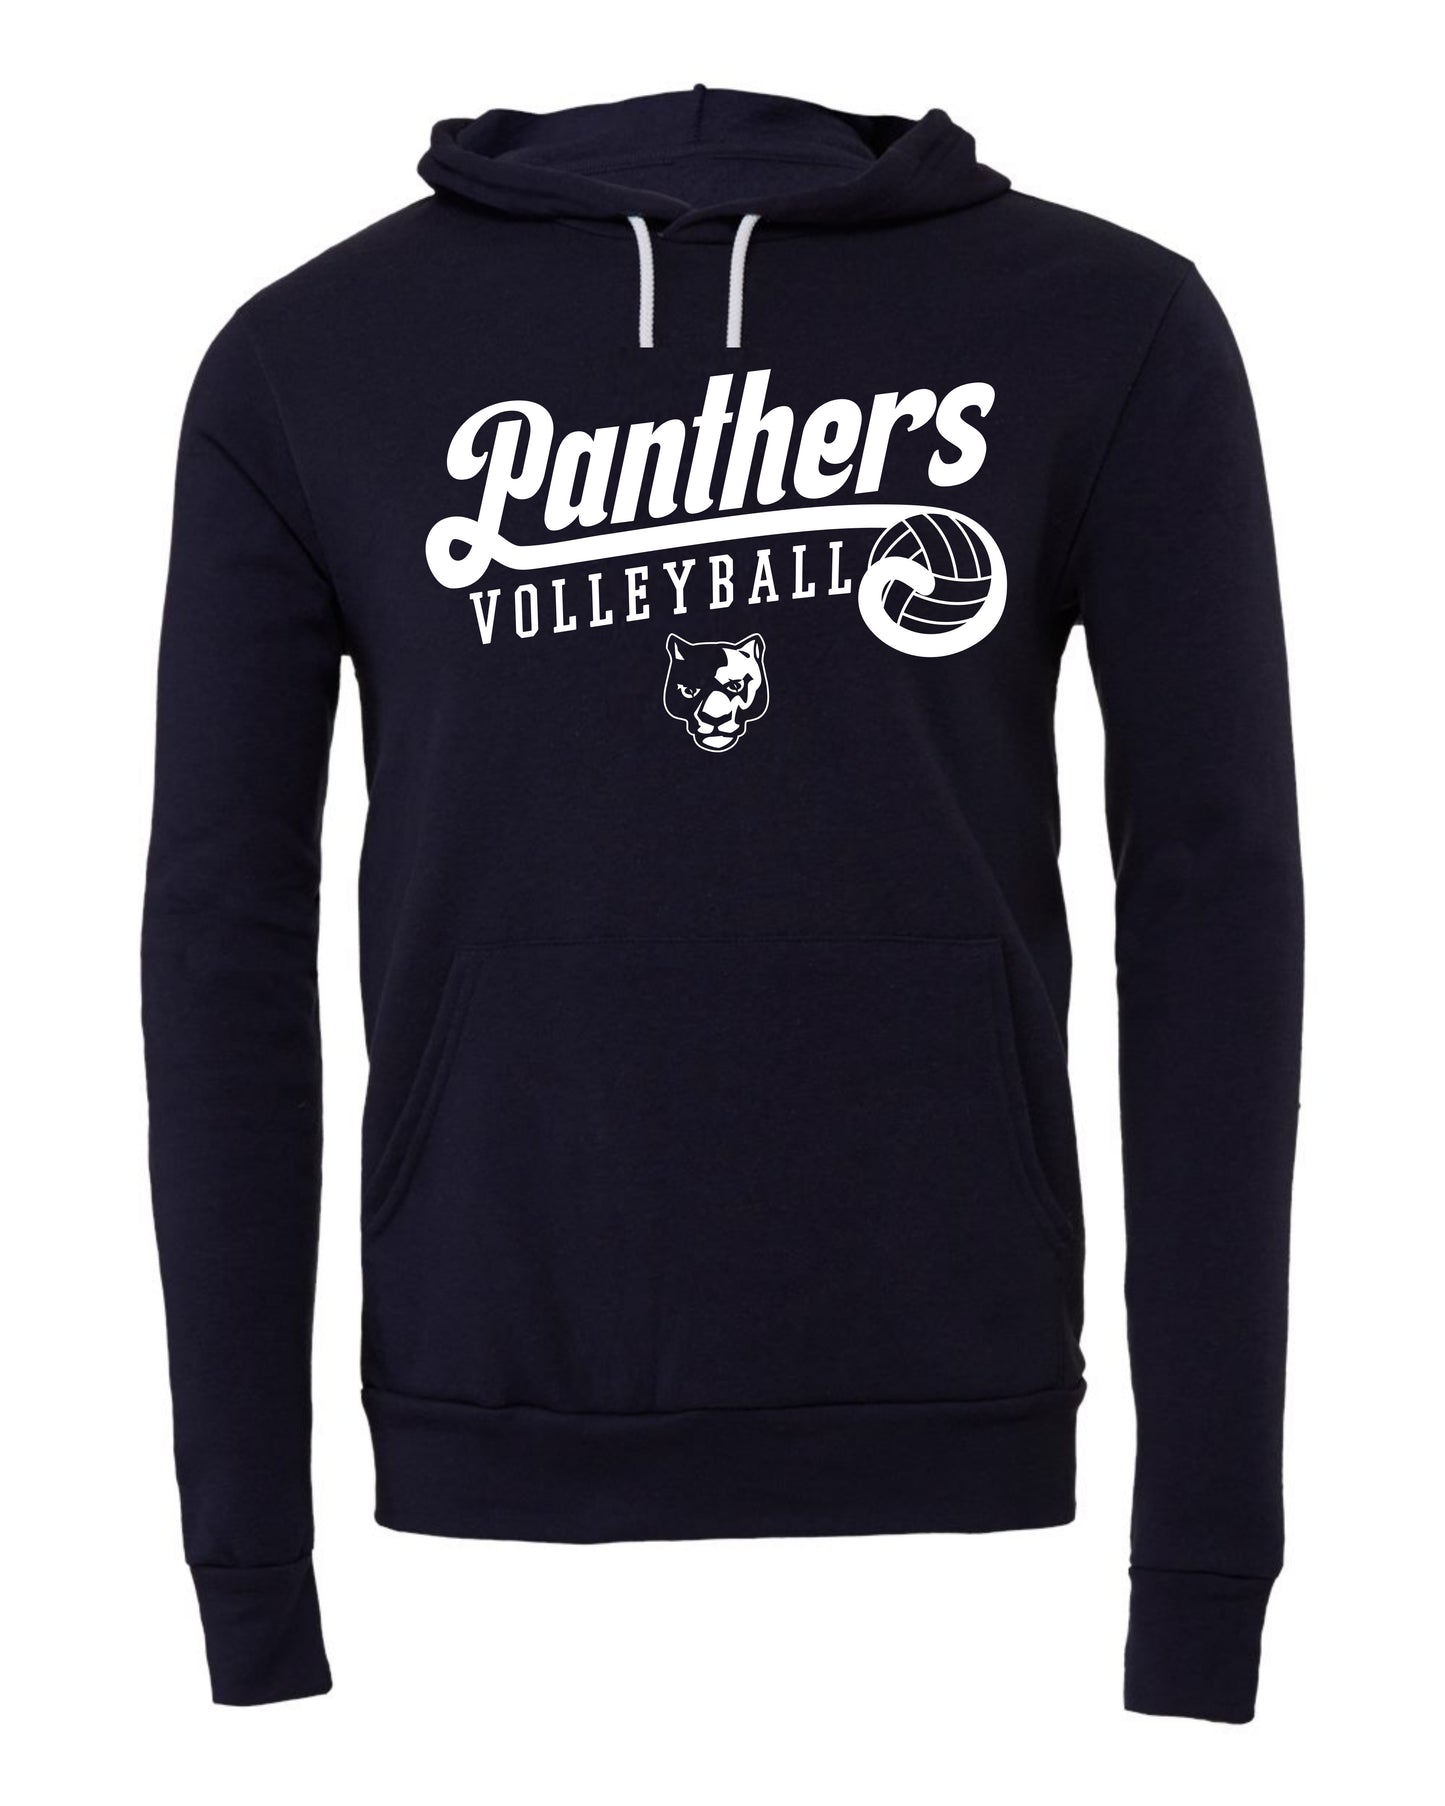 Panthers Volleyball Retro- Youth Hoodie